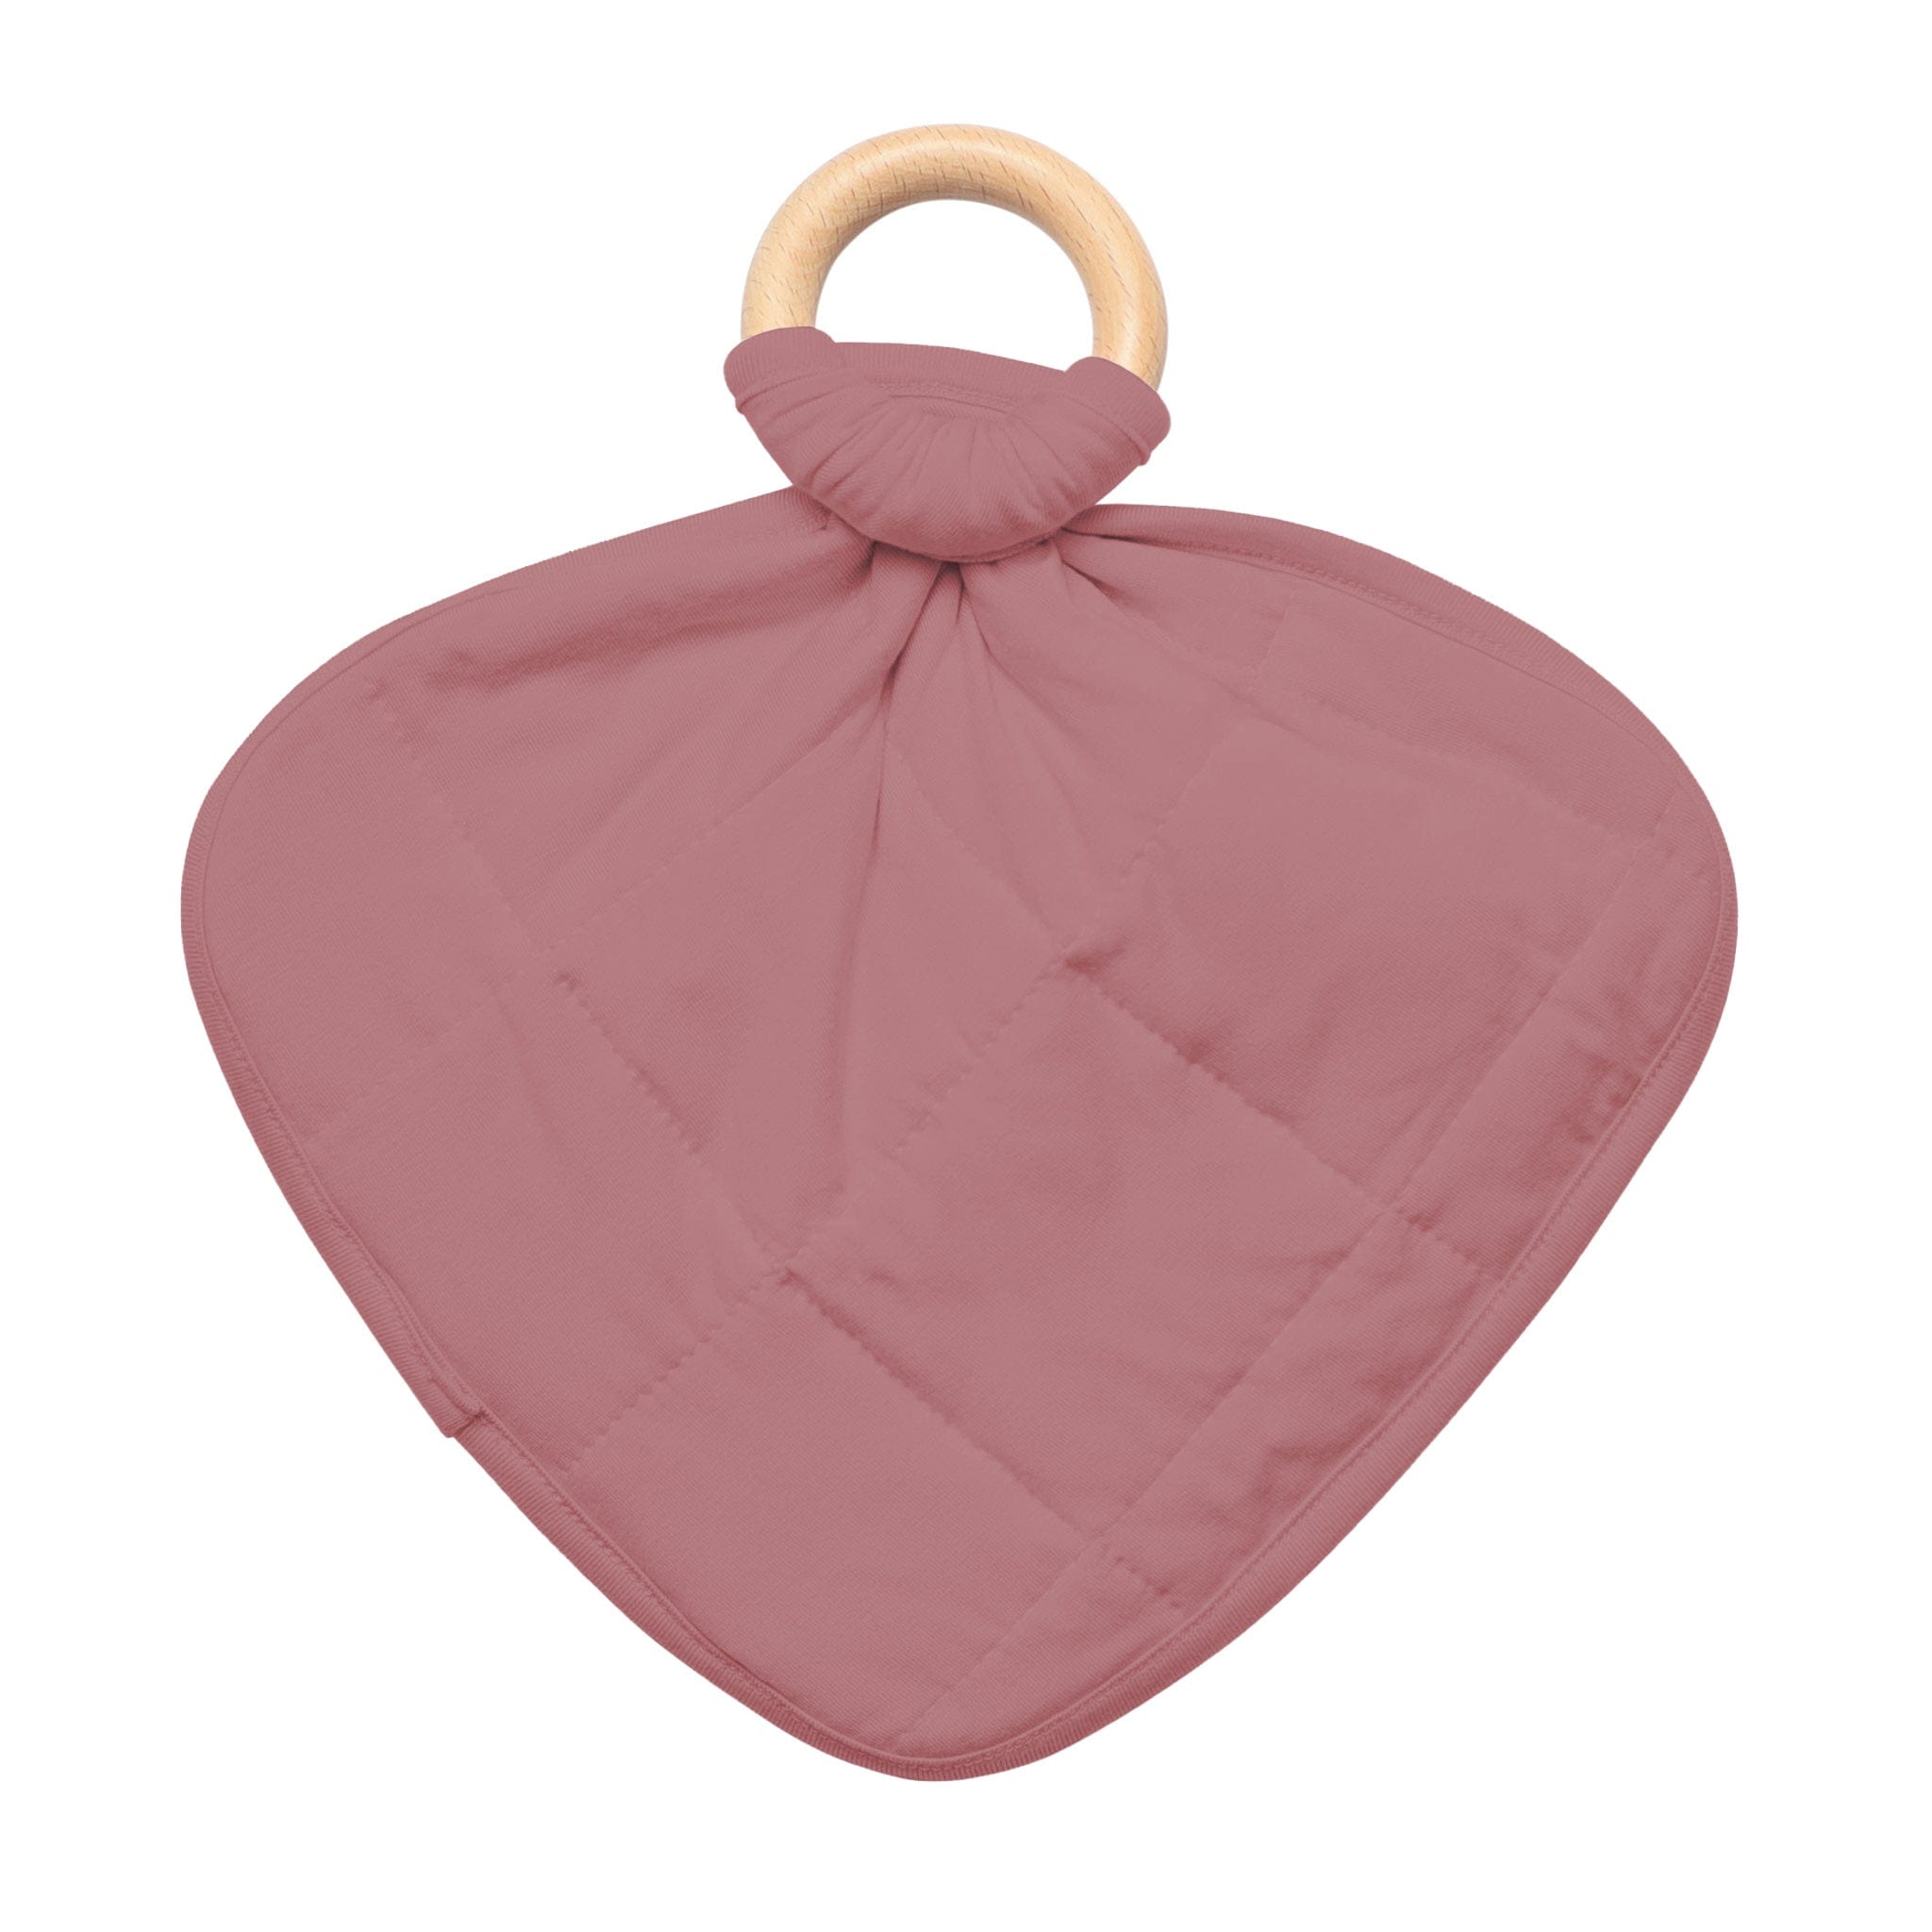 Kyte Baby Lovey Dusty Rose / Infant Lovey in Dusty Rose with Removable Teething Ring